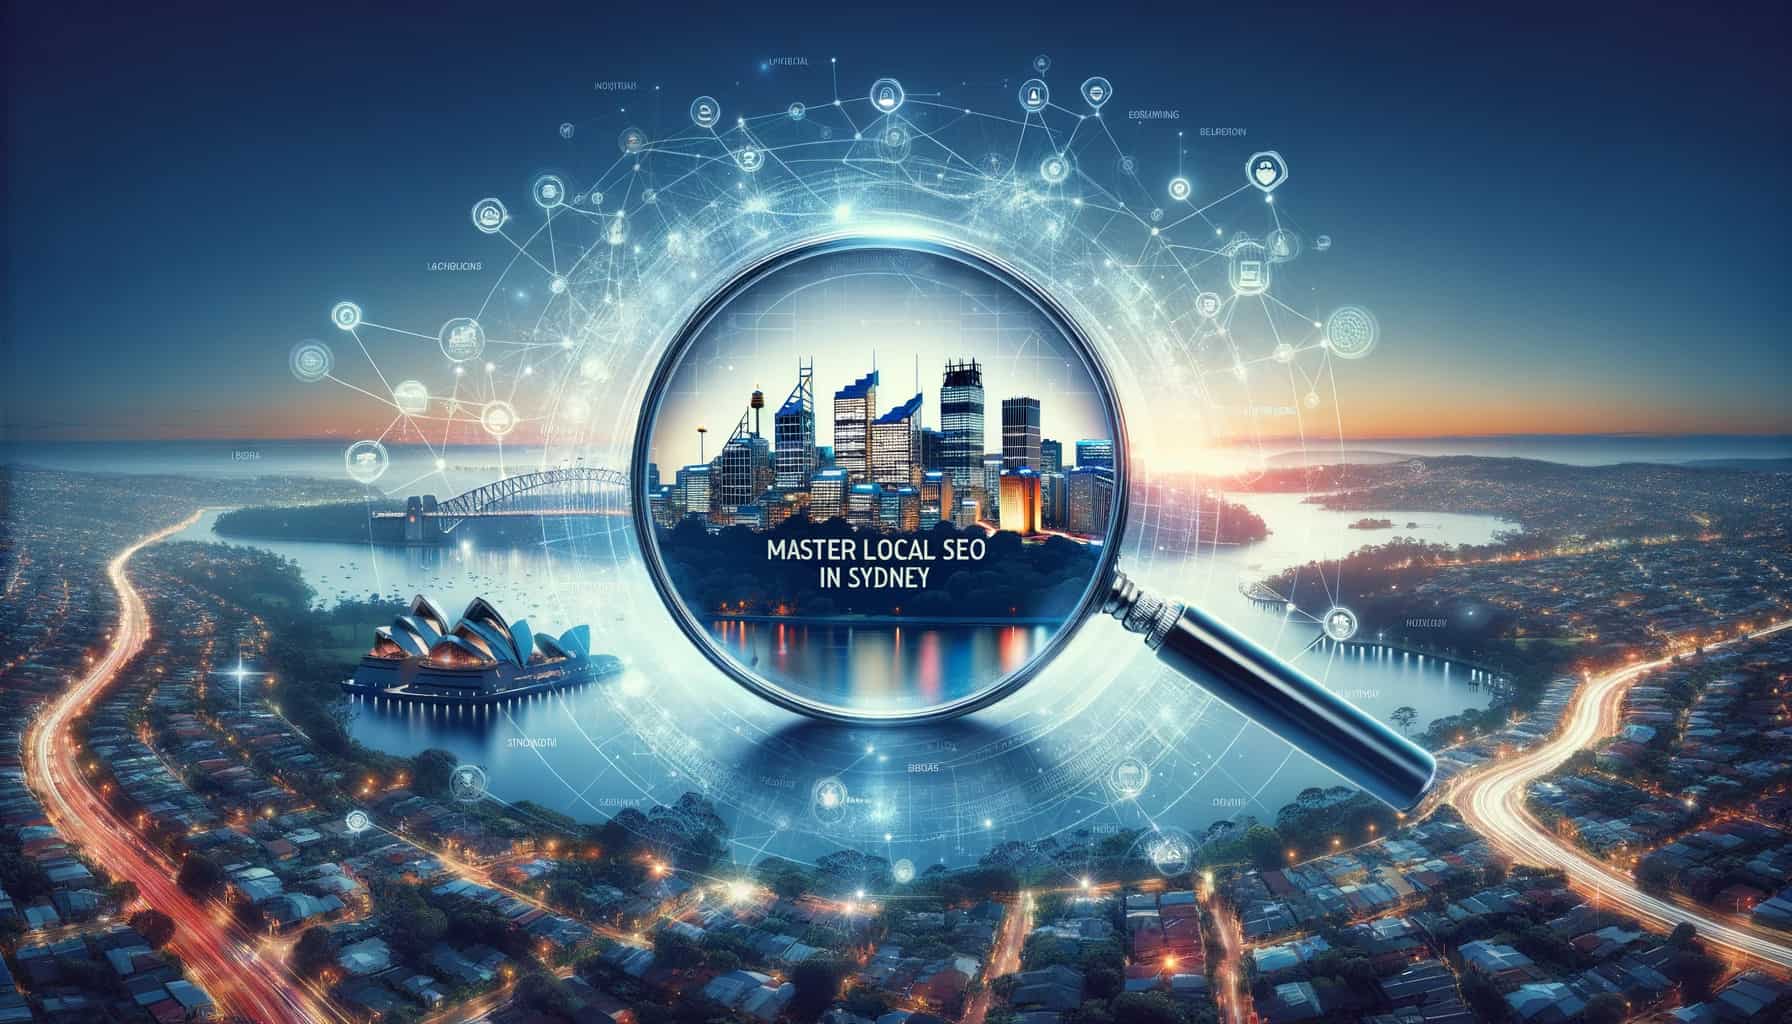 A magnifying glass hovering over a city with the text "master local SEO in Sydney" written on it, suggesting that local SEO can help businesses be more visible in online searches. 